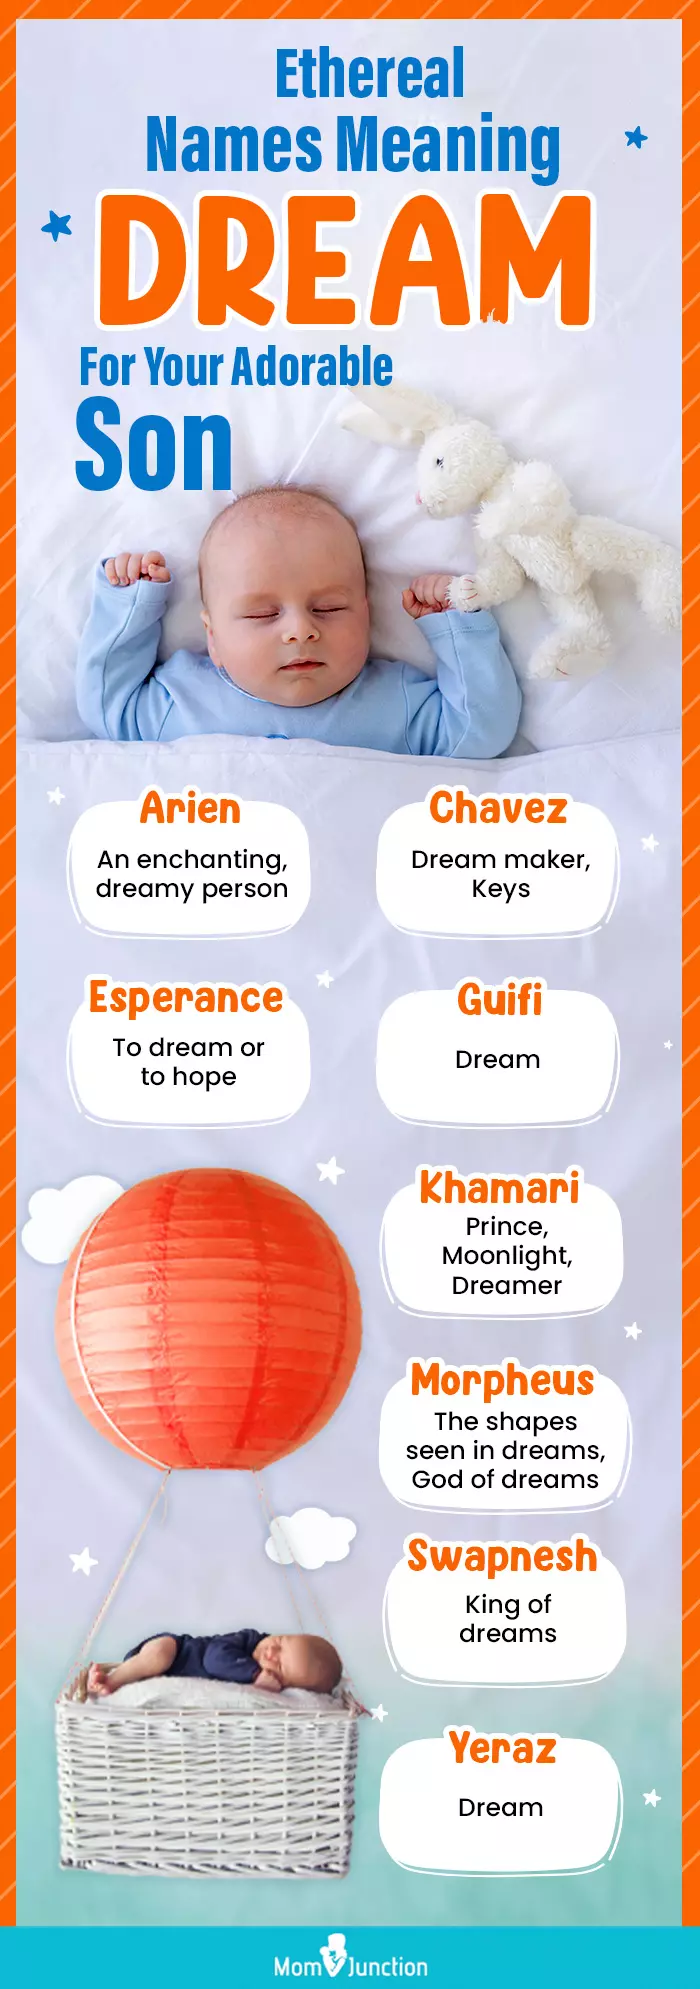 Ethereal Names Meaning Dream For Your Adorable Son (infographic)